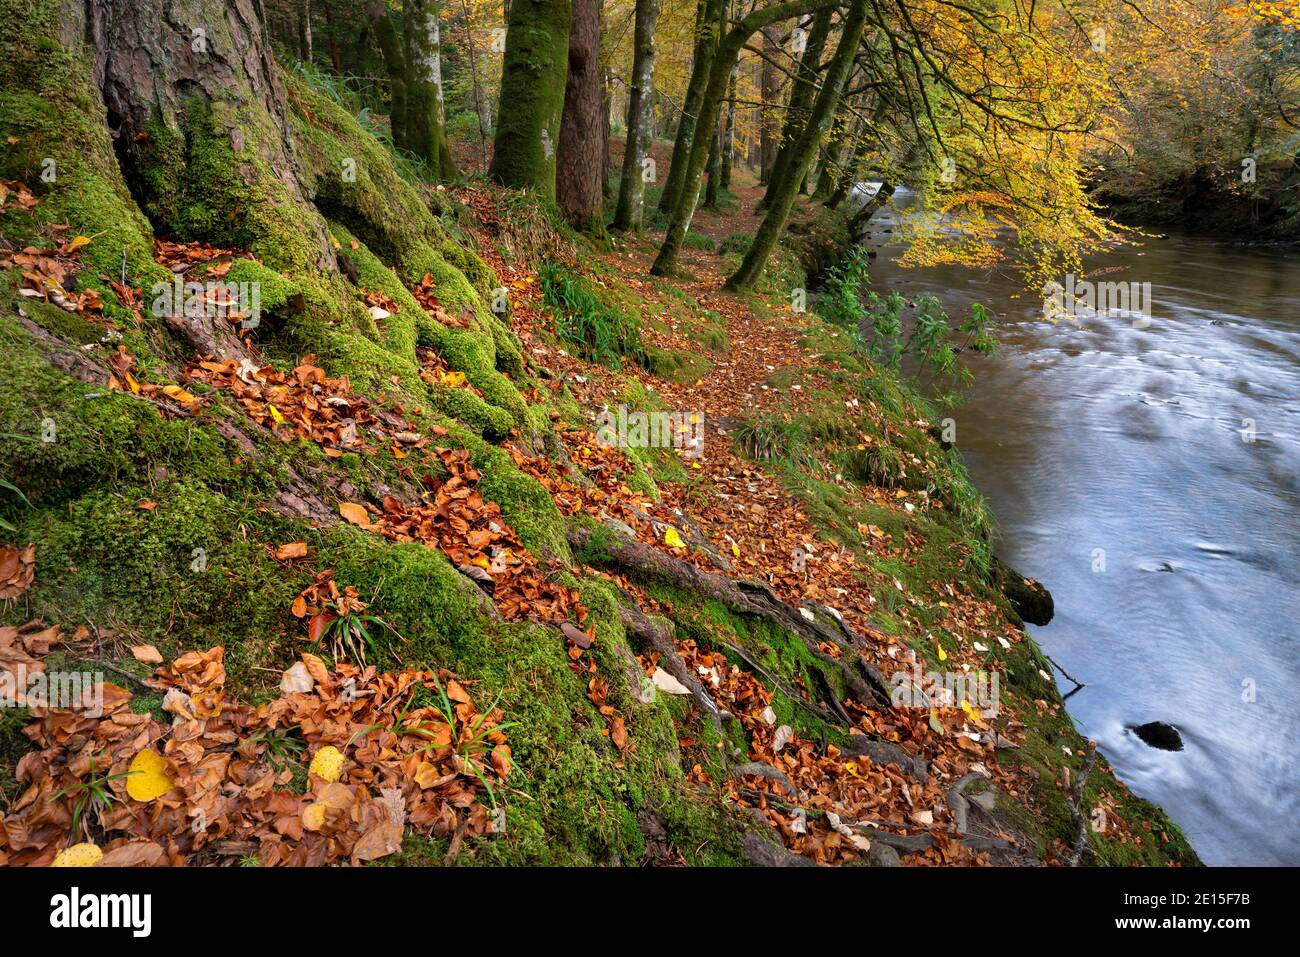 Glencoe, Scotland: Beech trees in fall color overhanging the river Coe Stock Photo